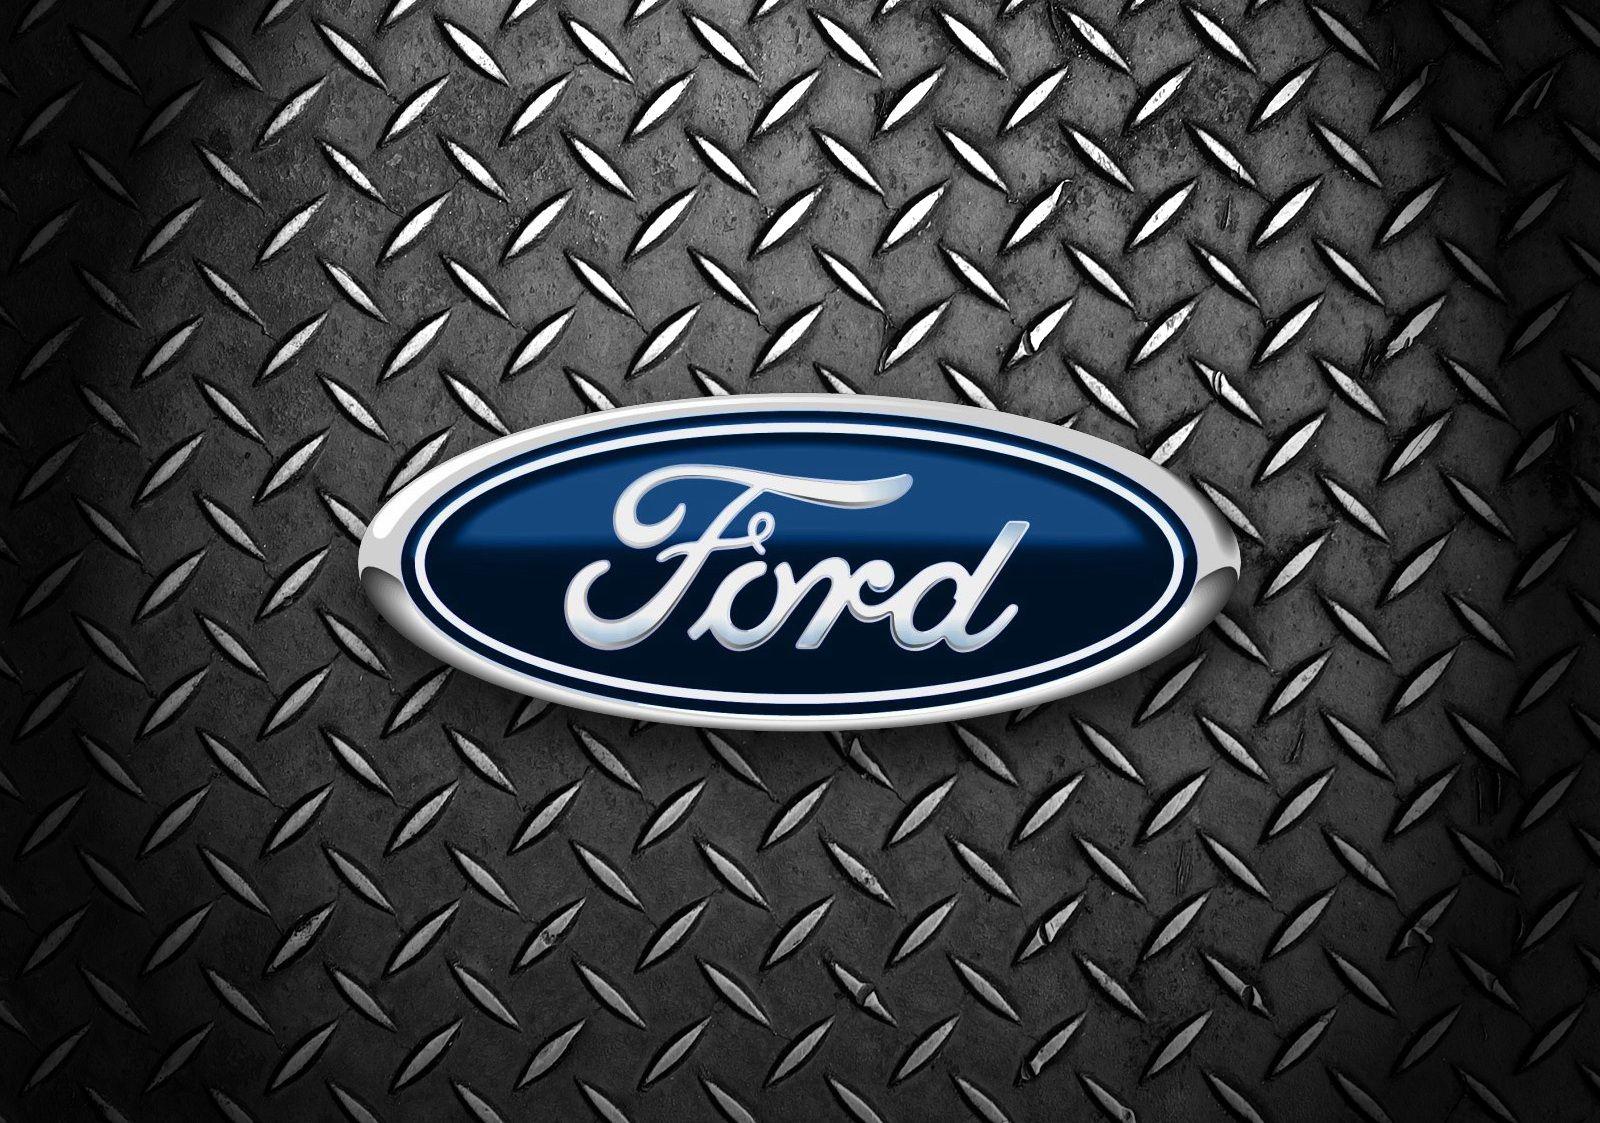 White Car Blue Oval Logo - Ford Logo, Ford Car Symbol Meaning and History | Car Brand Names.com